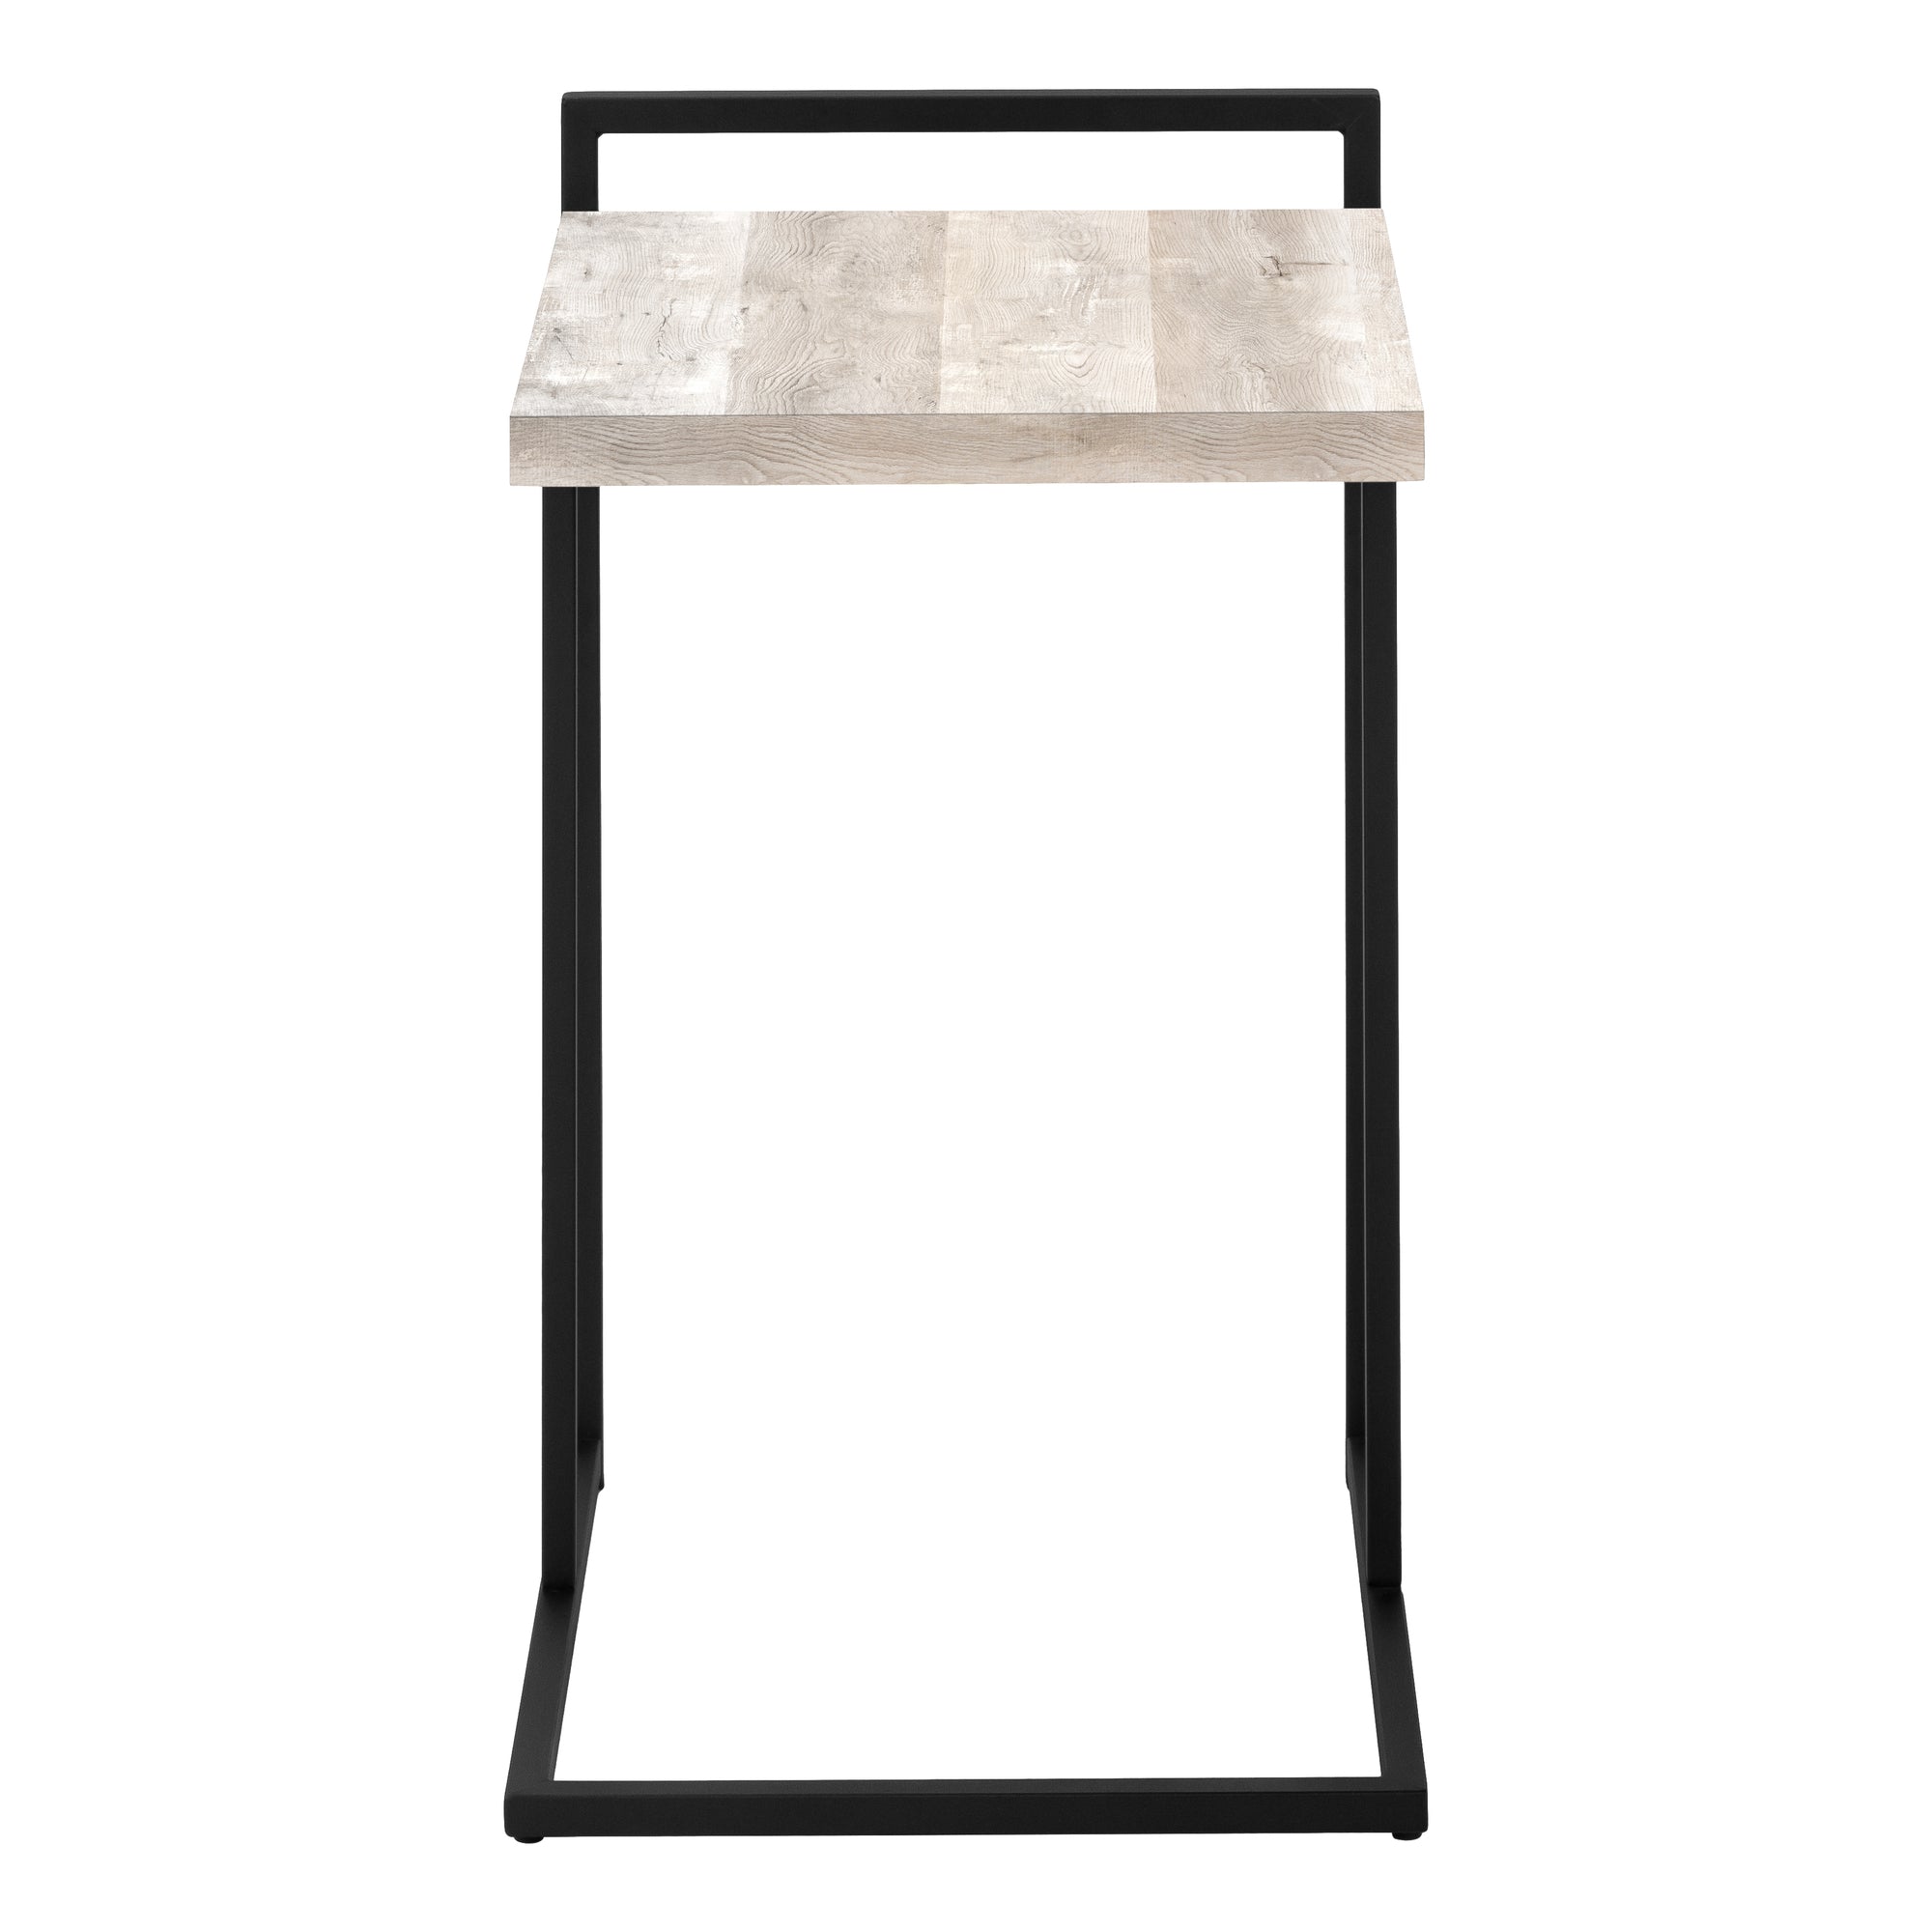 MN-813632    Accent Table, C-Shaped, End, Side, Snack, Living Room, Bedroom, Metal Frame, Laminate, Taupe Reclaimed Wood Look, Black, Contemporary, Industrial, Modern